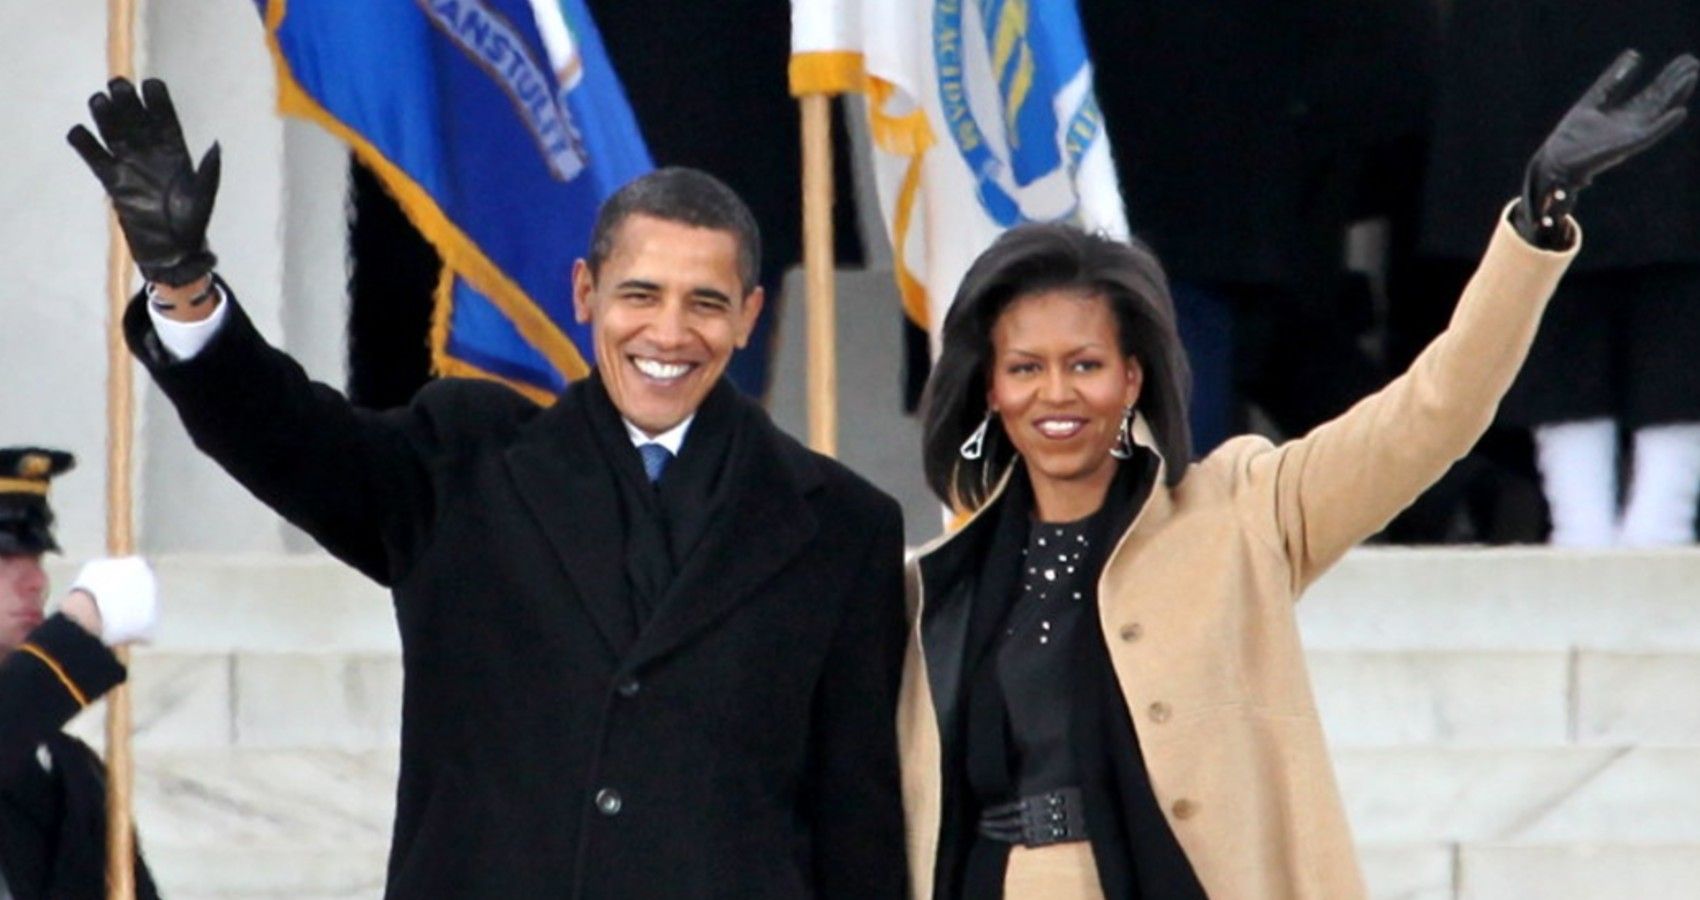 Barack and Michelle Obama waving at the crowd